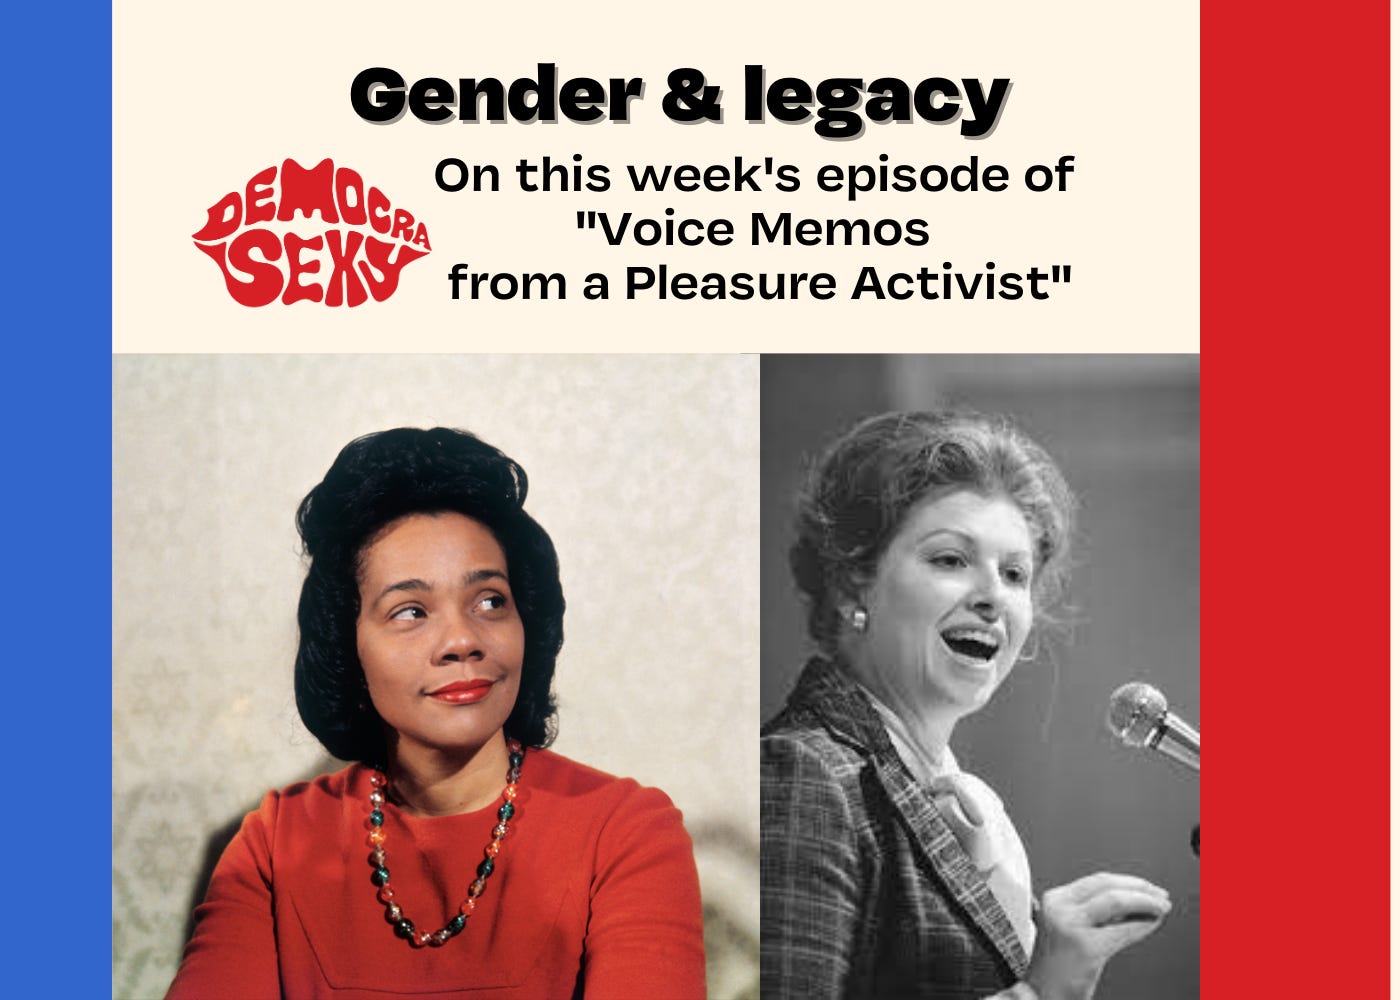 Text: Gender & Legacy. On this week's episode of "Voice Memos from a Pleasure Activist" with an image of a young Coretta Scott Kind in a red top and necklace smiling confidently. And a black and white photo of a young Sarah Weddington in a plaid blazer speaking confidently at a microphone.